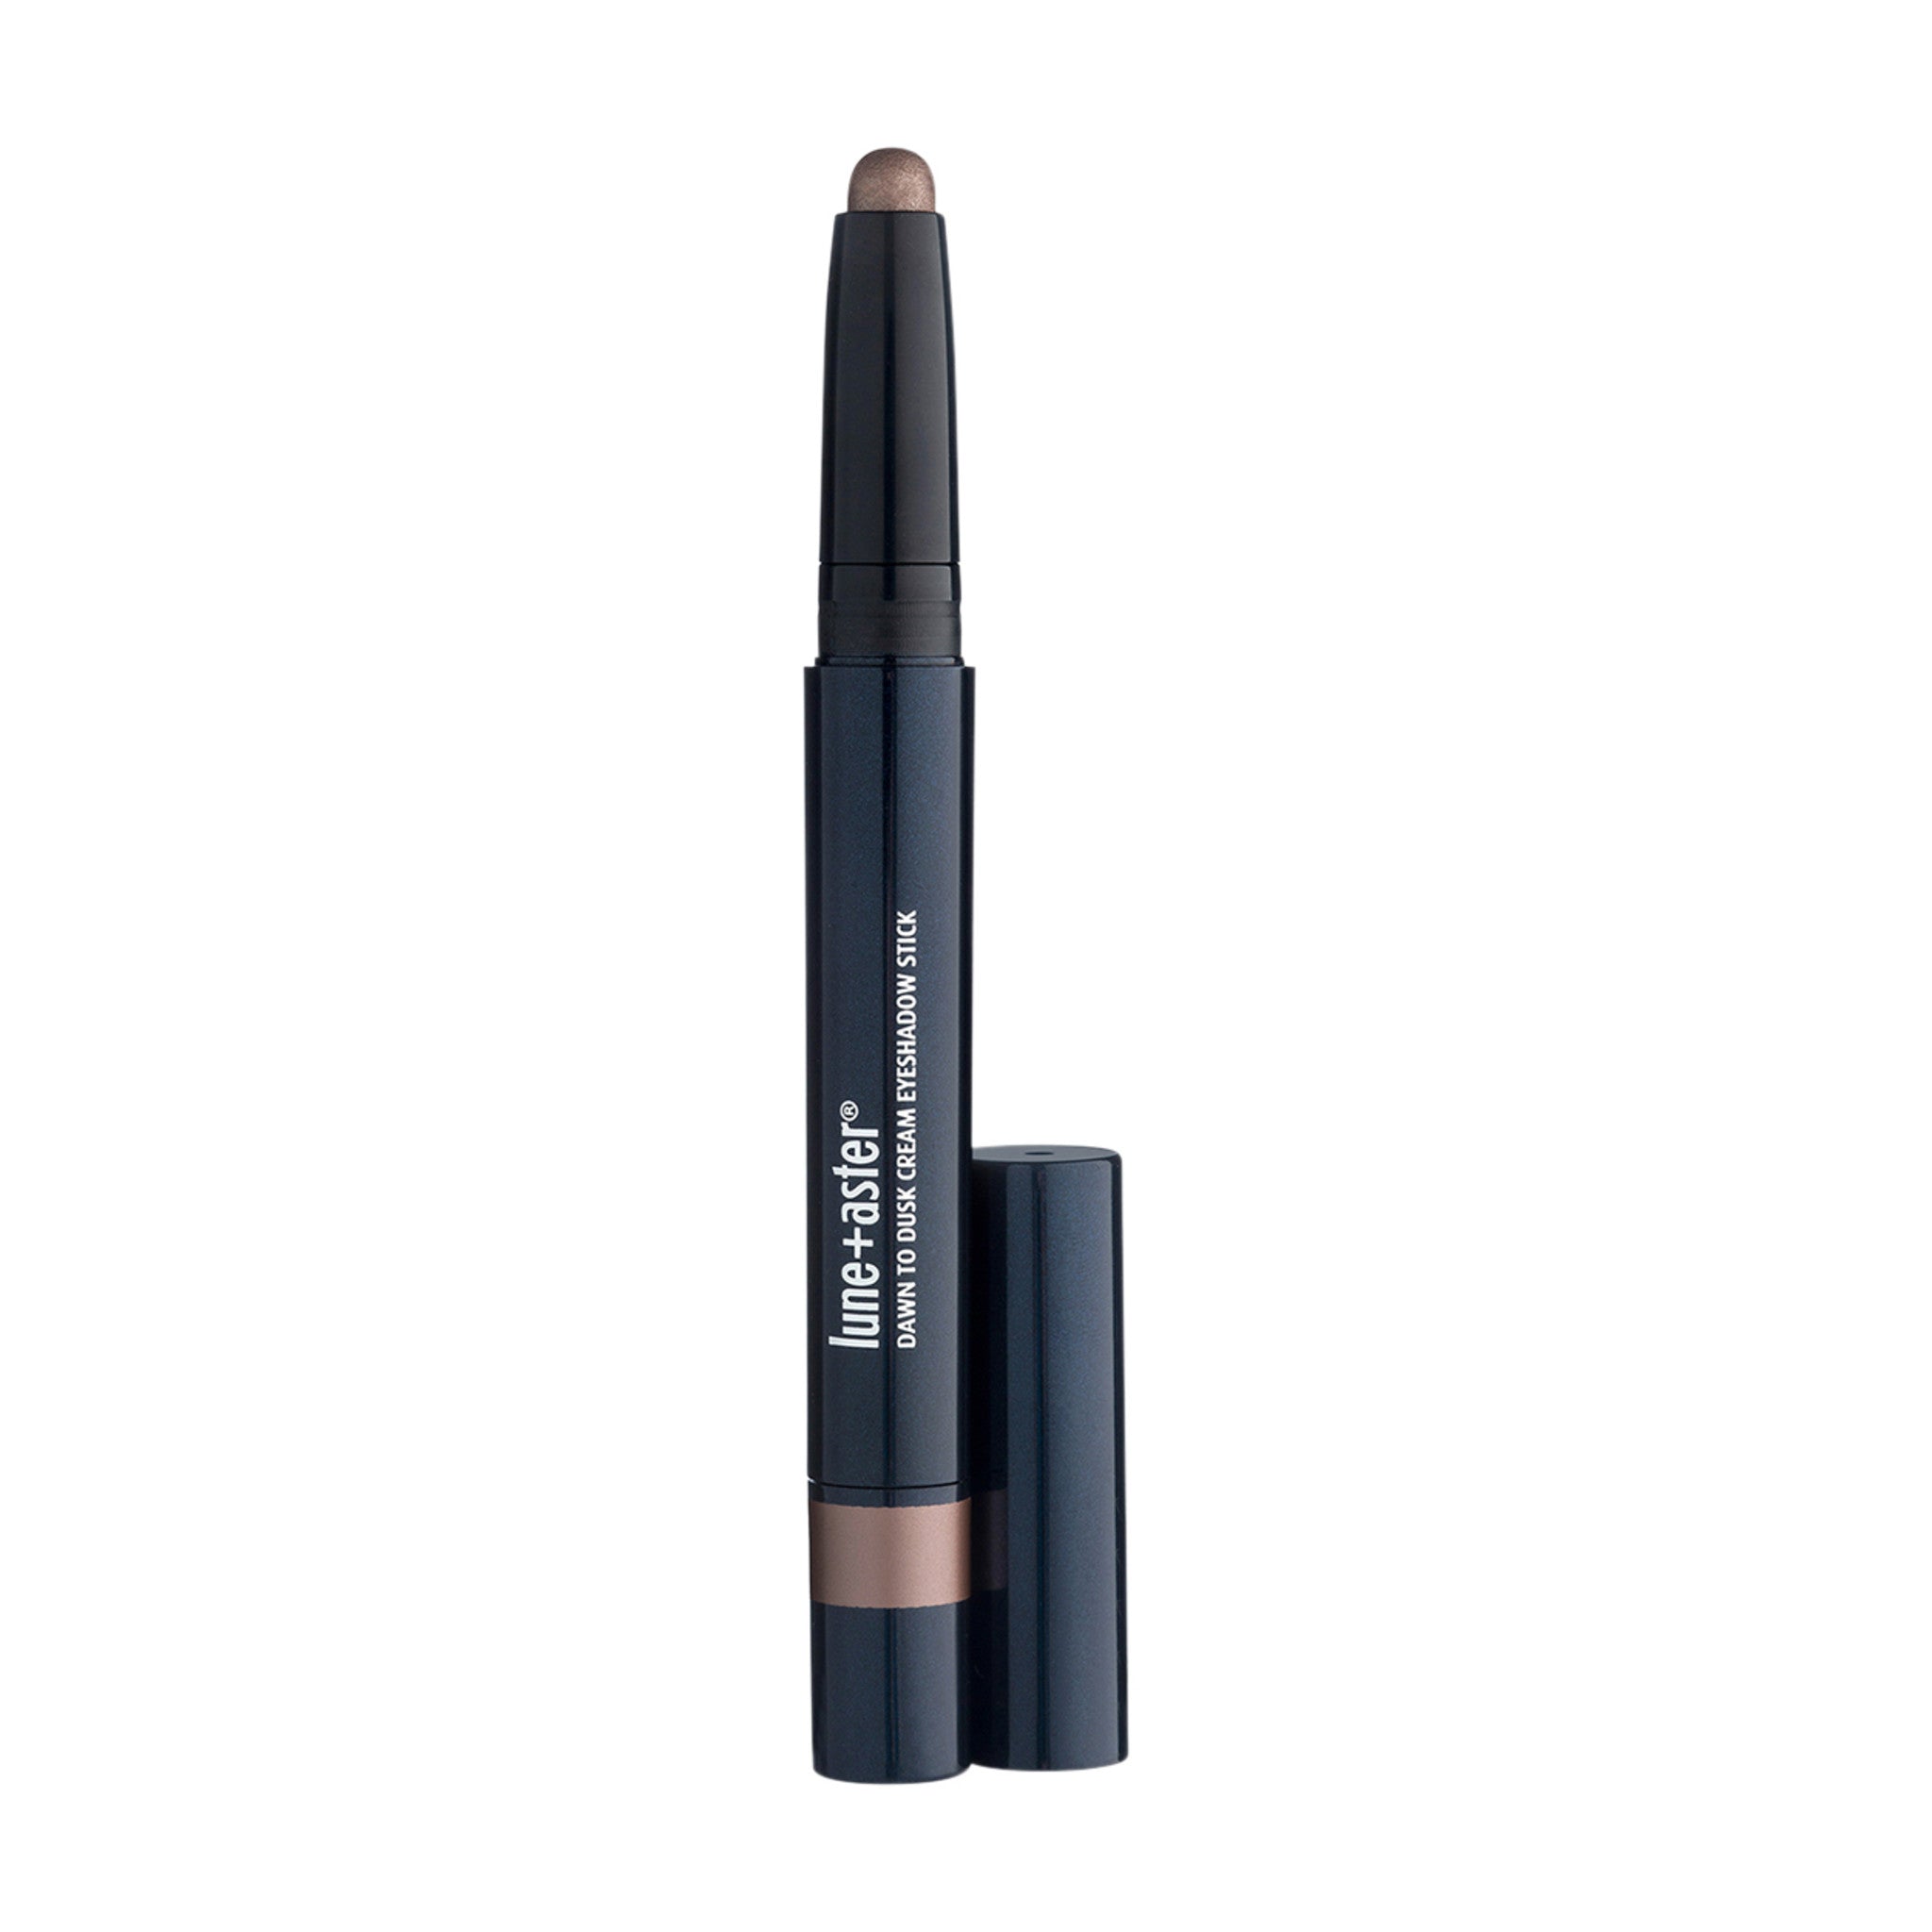 Lune+Aster Dawn to Dusk Cream Eyeshadow Stick Color/Shade variant: Shimmer Sunset Bronze main image. This product is in the color bronze